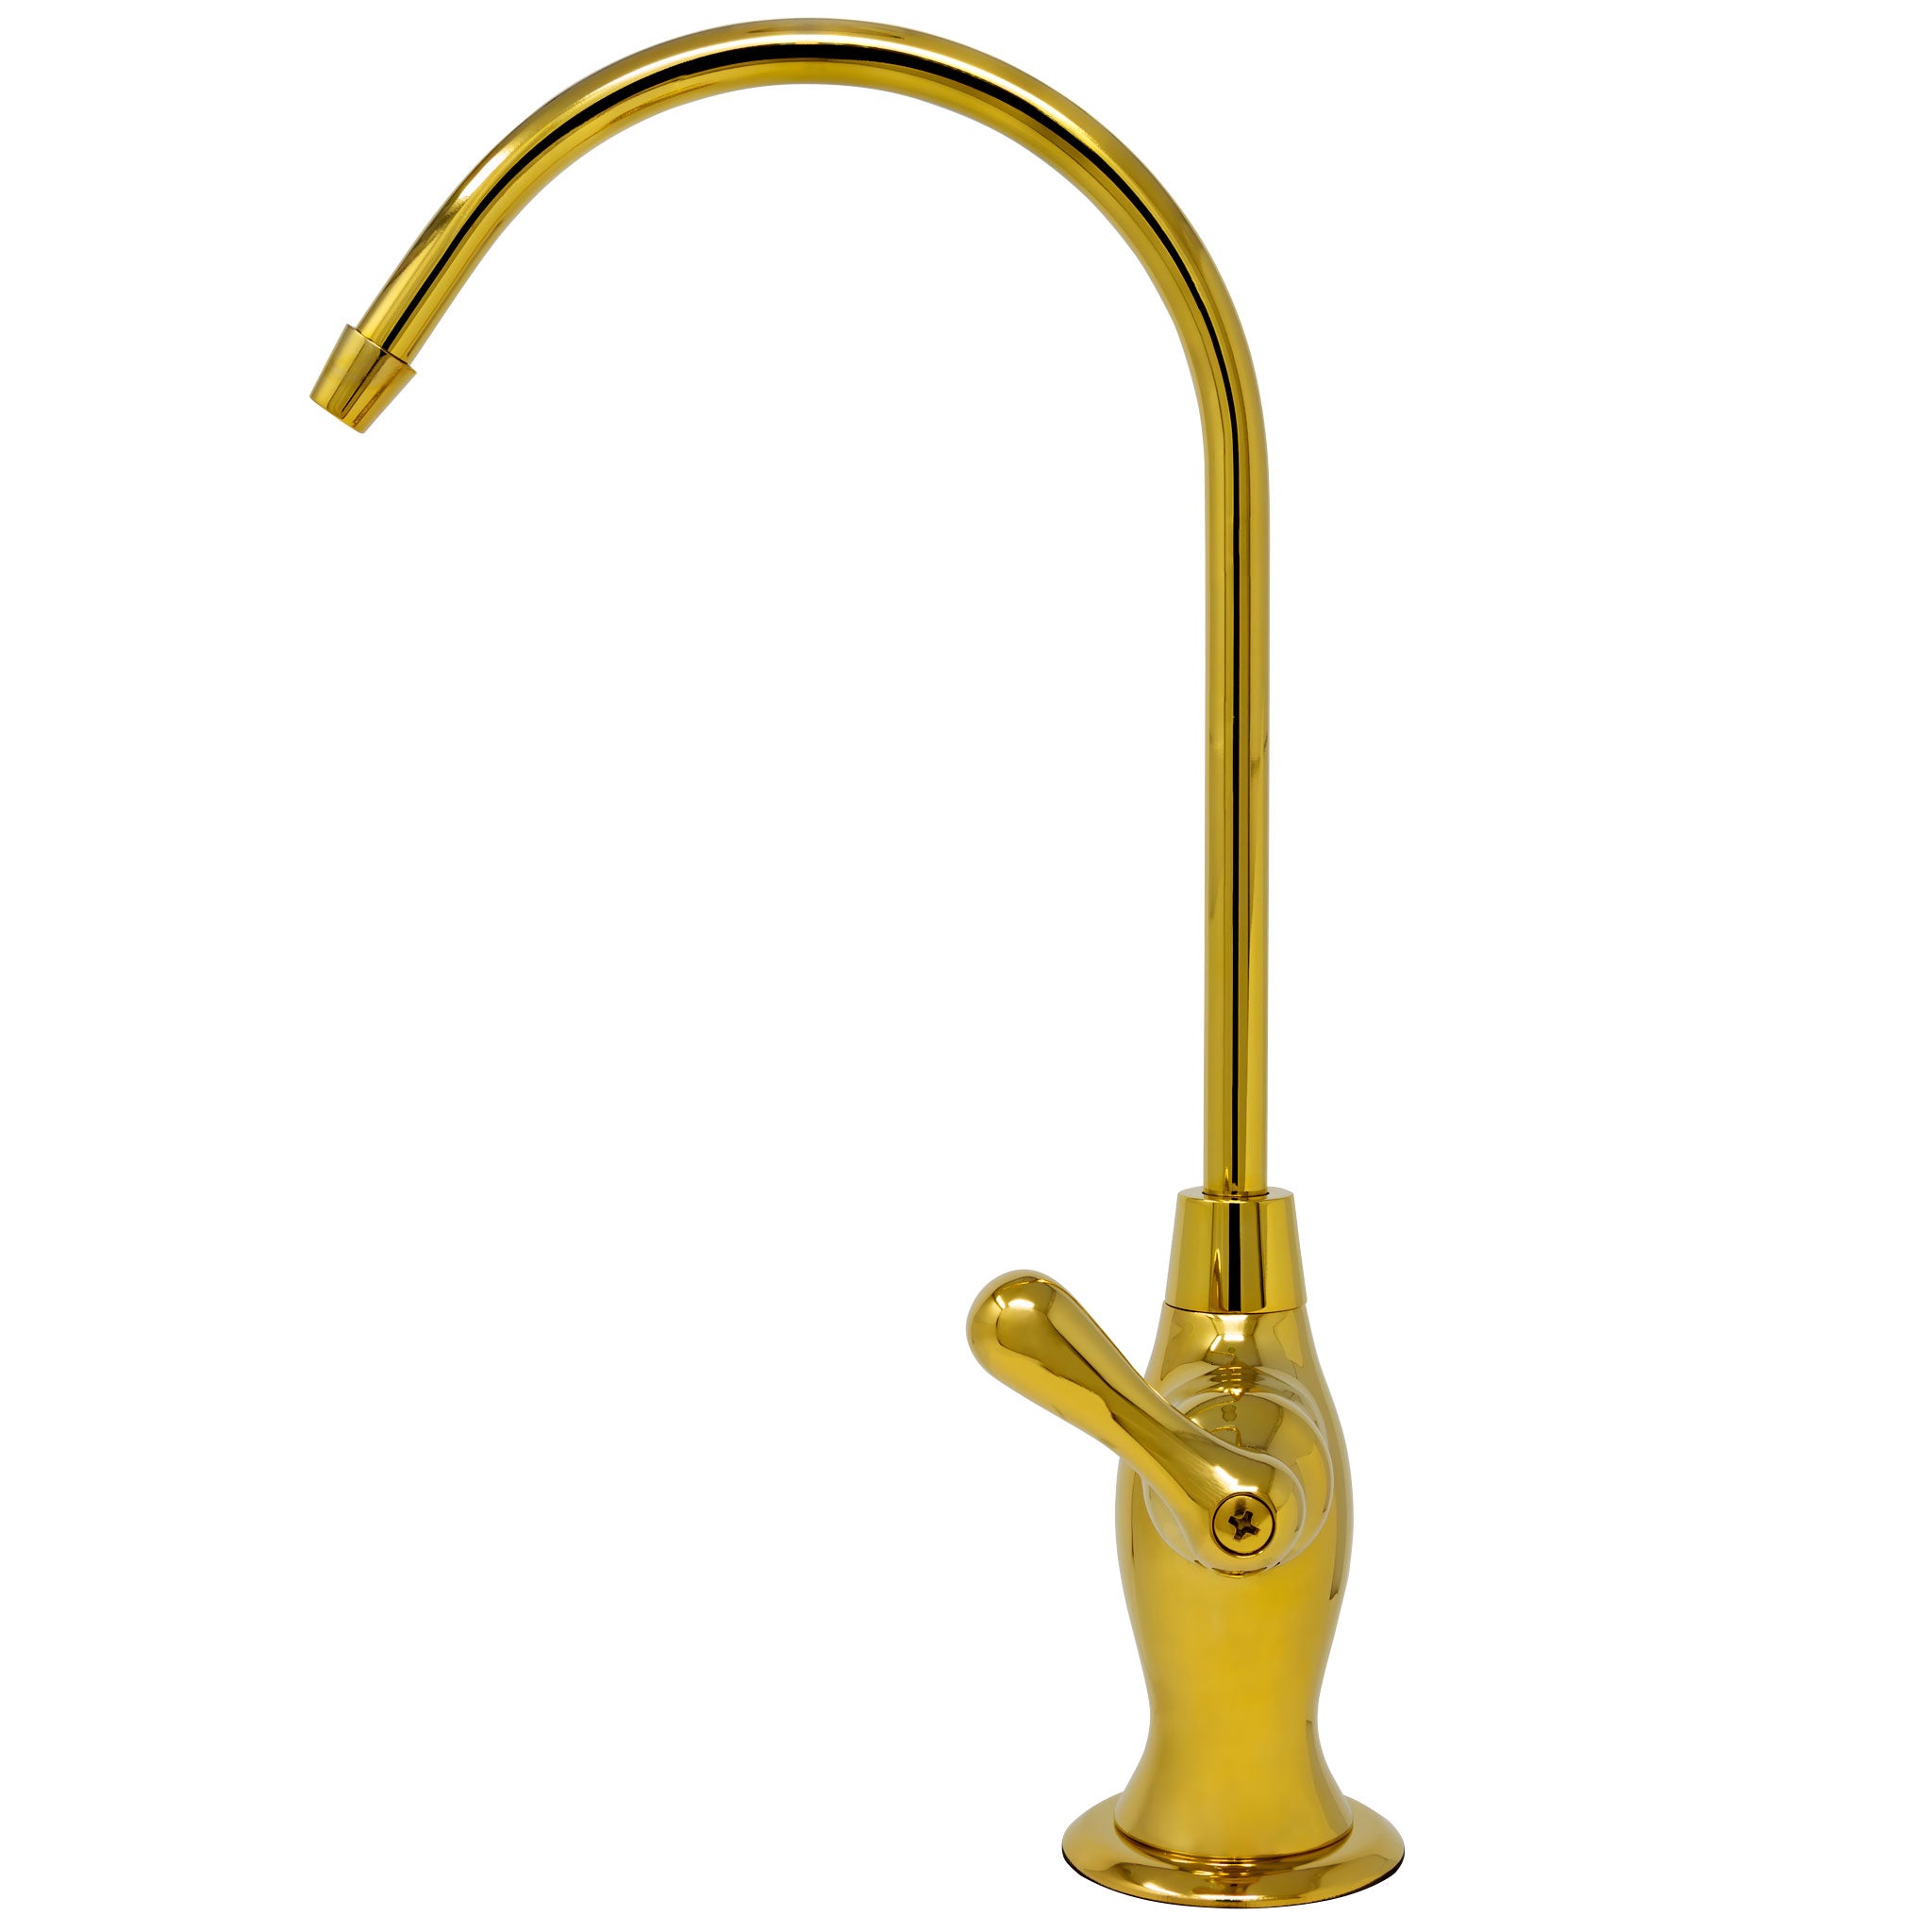 Water Filtration Faucet Vase Style Bright Gold Reverse Osmosis Non Air Gap. Certified by NSF.